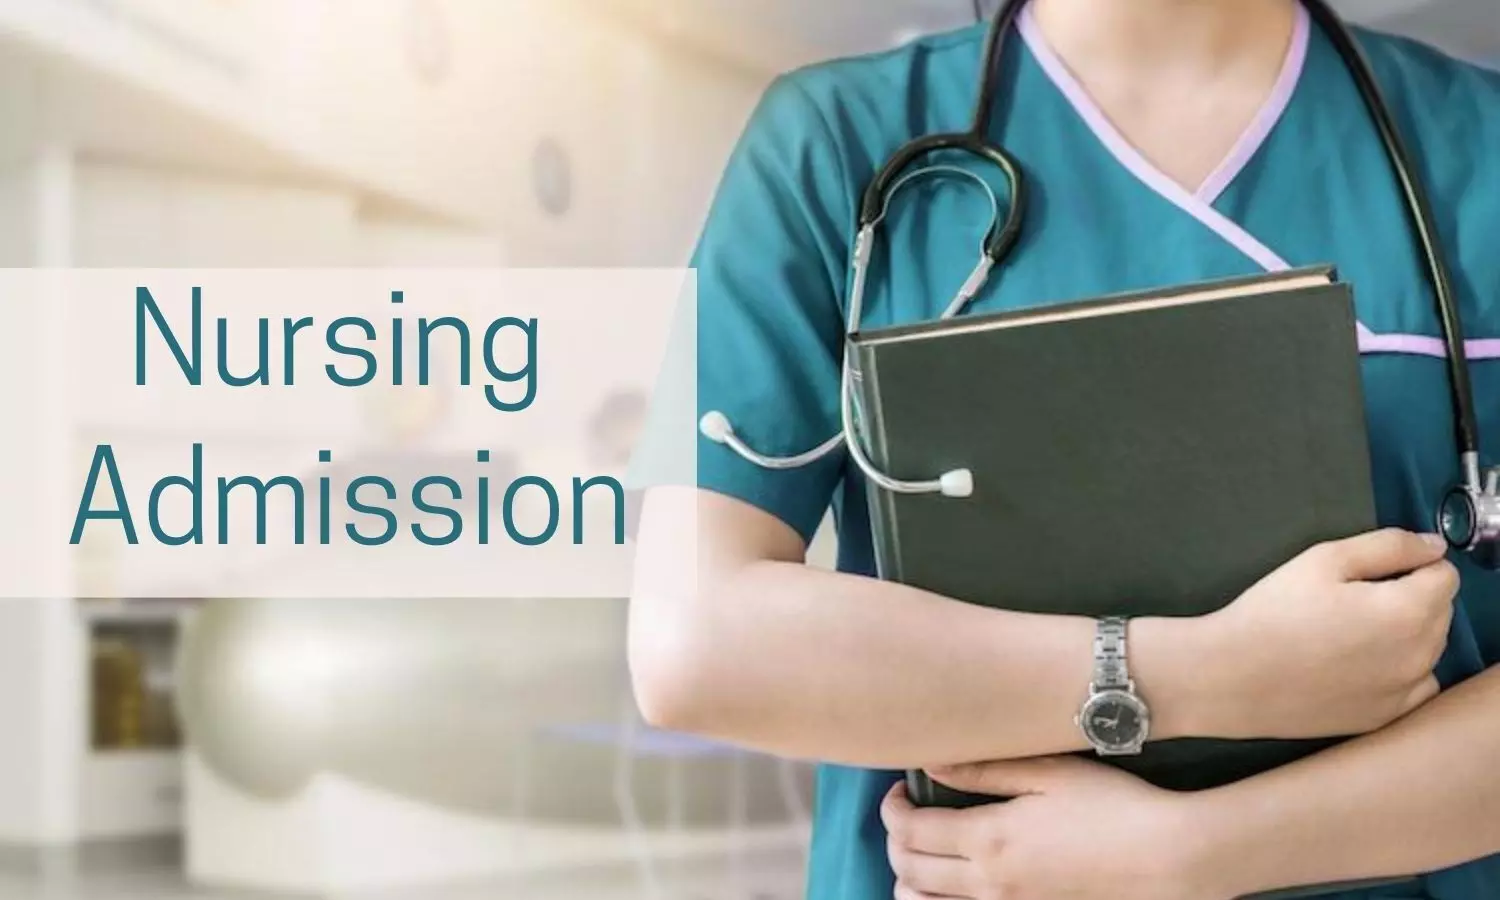 DME Chhattisgarh to release New Counselling Schedule for Nursing admission soon